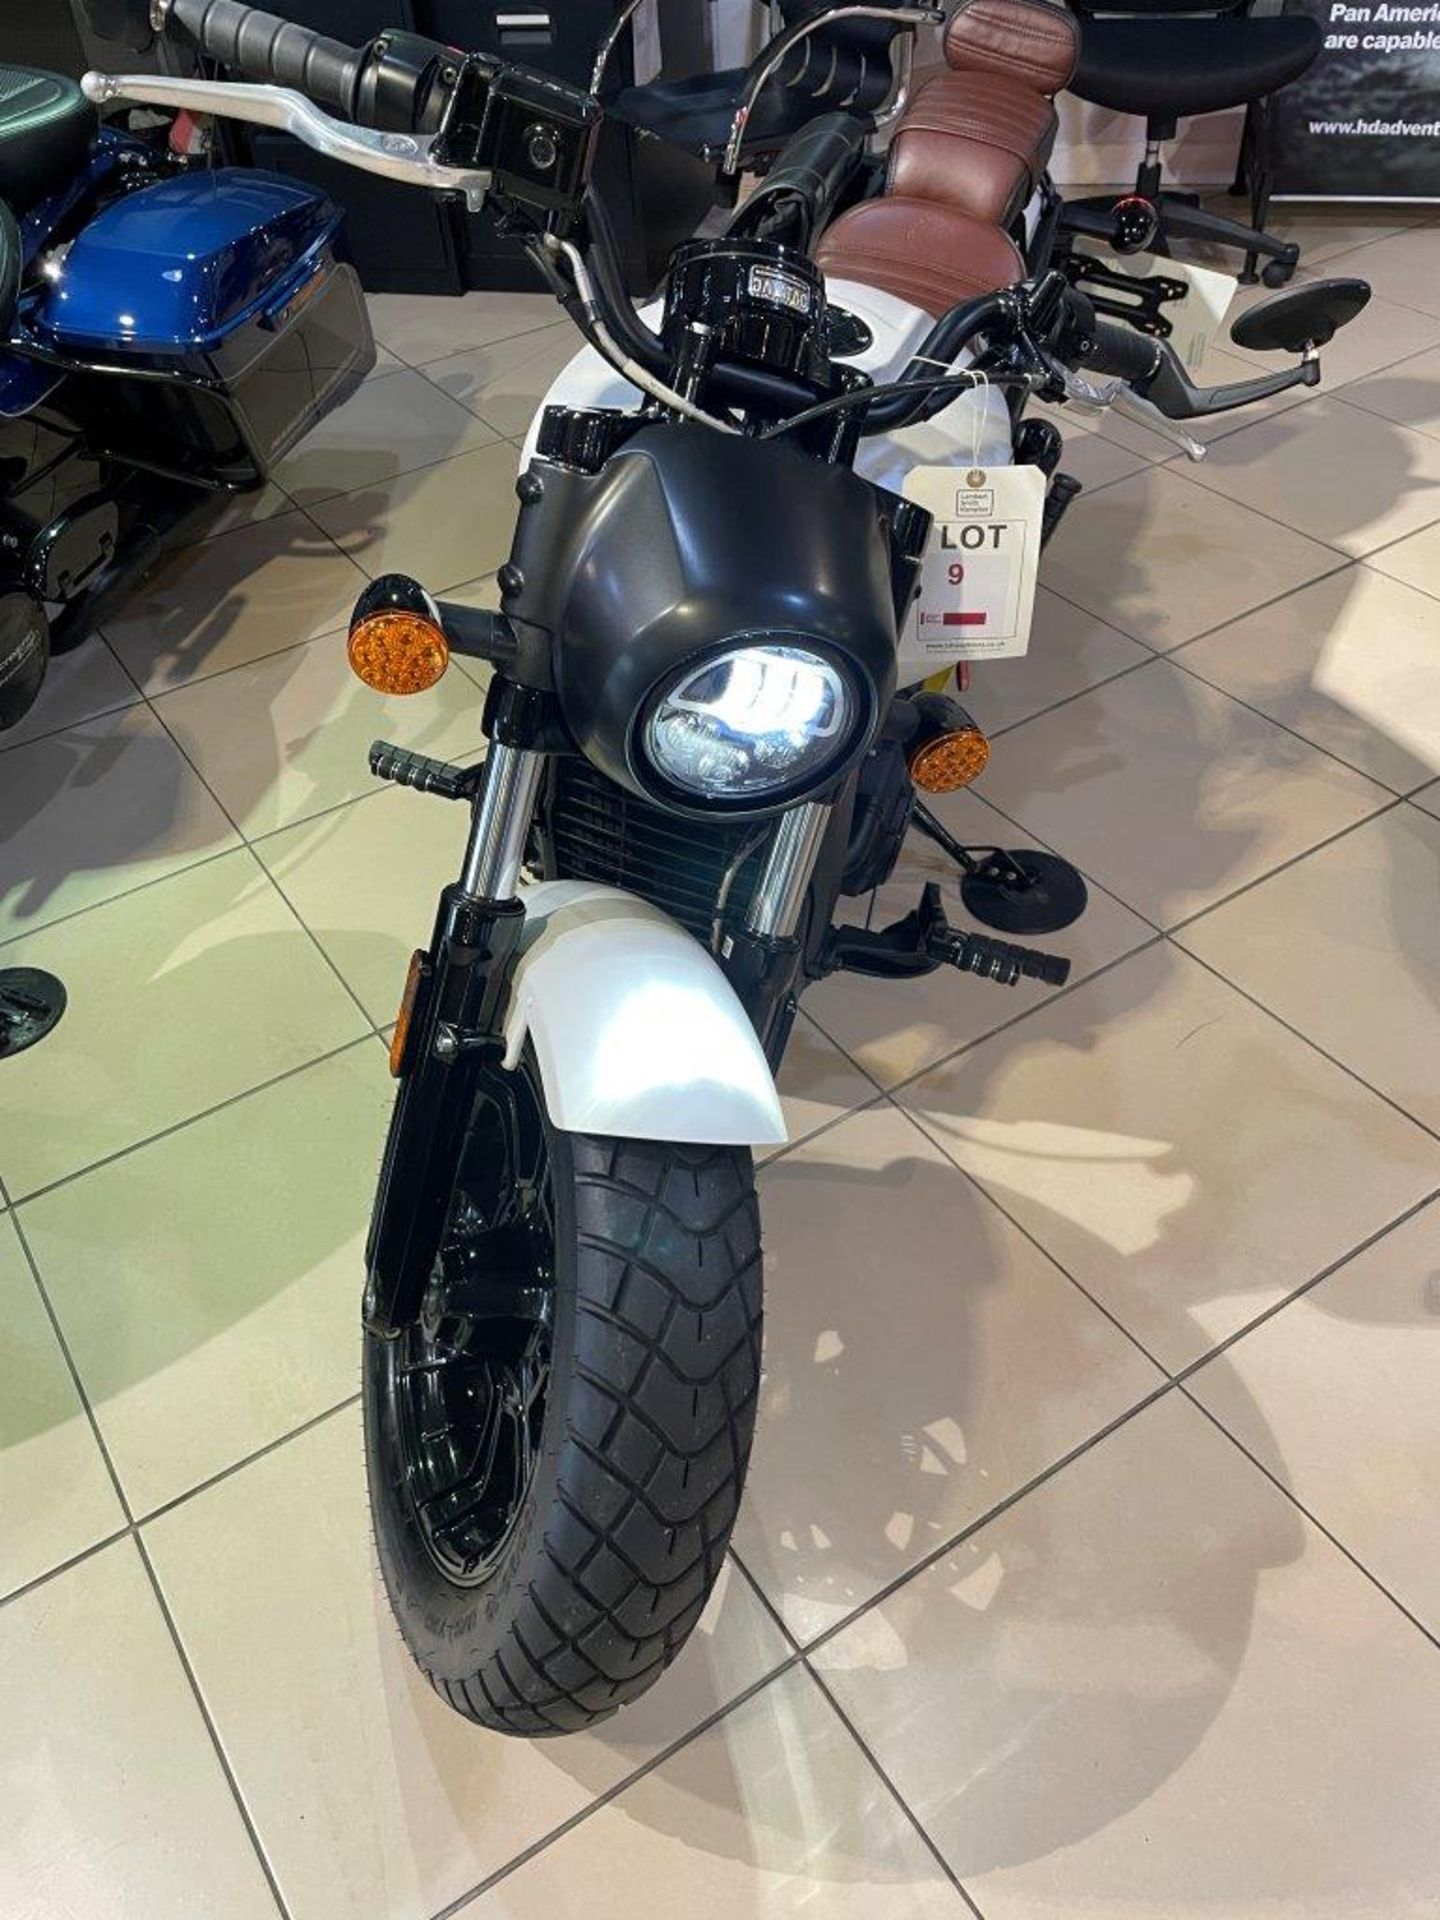 Indian Motorcycles Scout Bobber Motorbike (May 2019) - Image 14 of 18